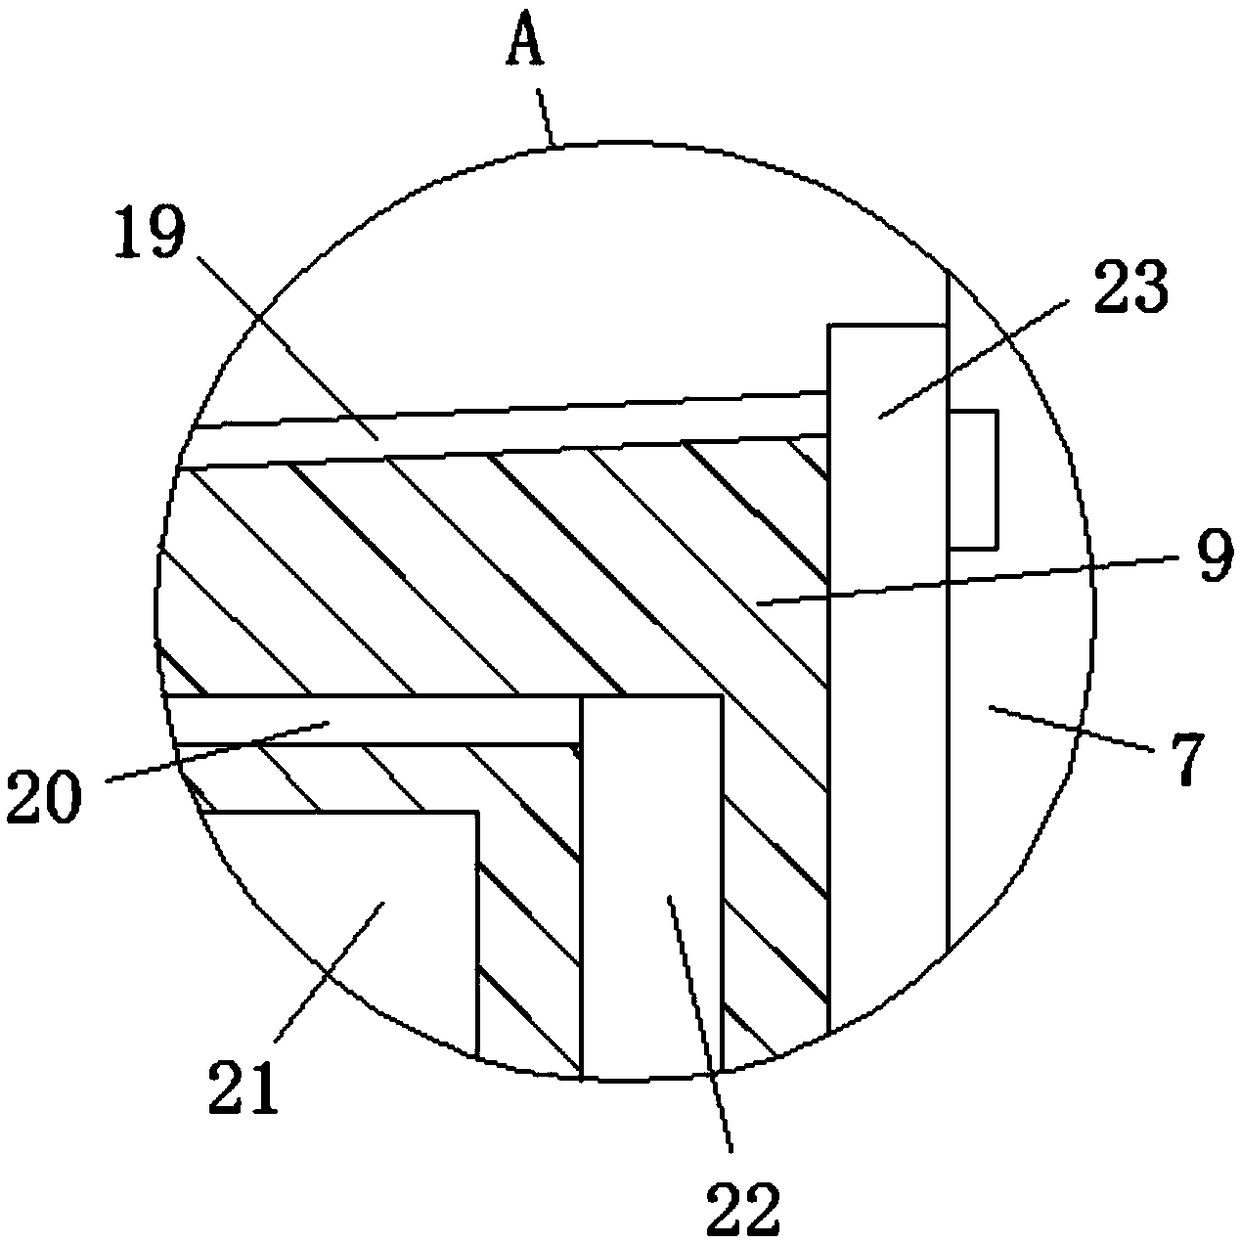 Ultrathin-wall part cutting device